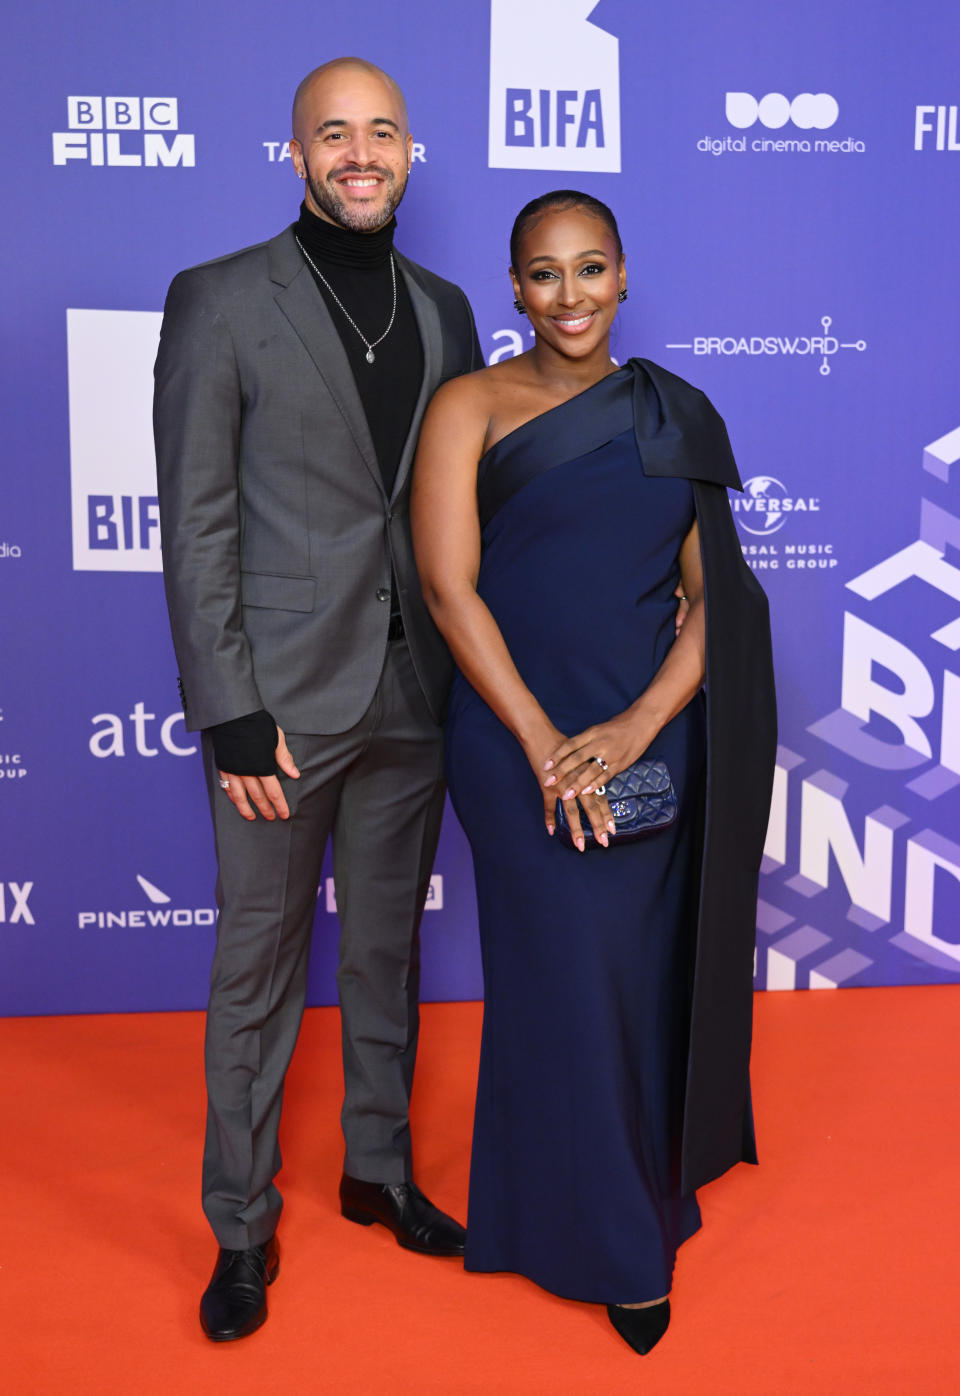 Alexandra Burke and partner Darren Randolph at The 26th British Independent Film Awards in December, 2023 in London. (Getty Images)